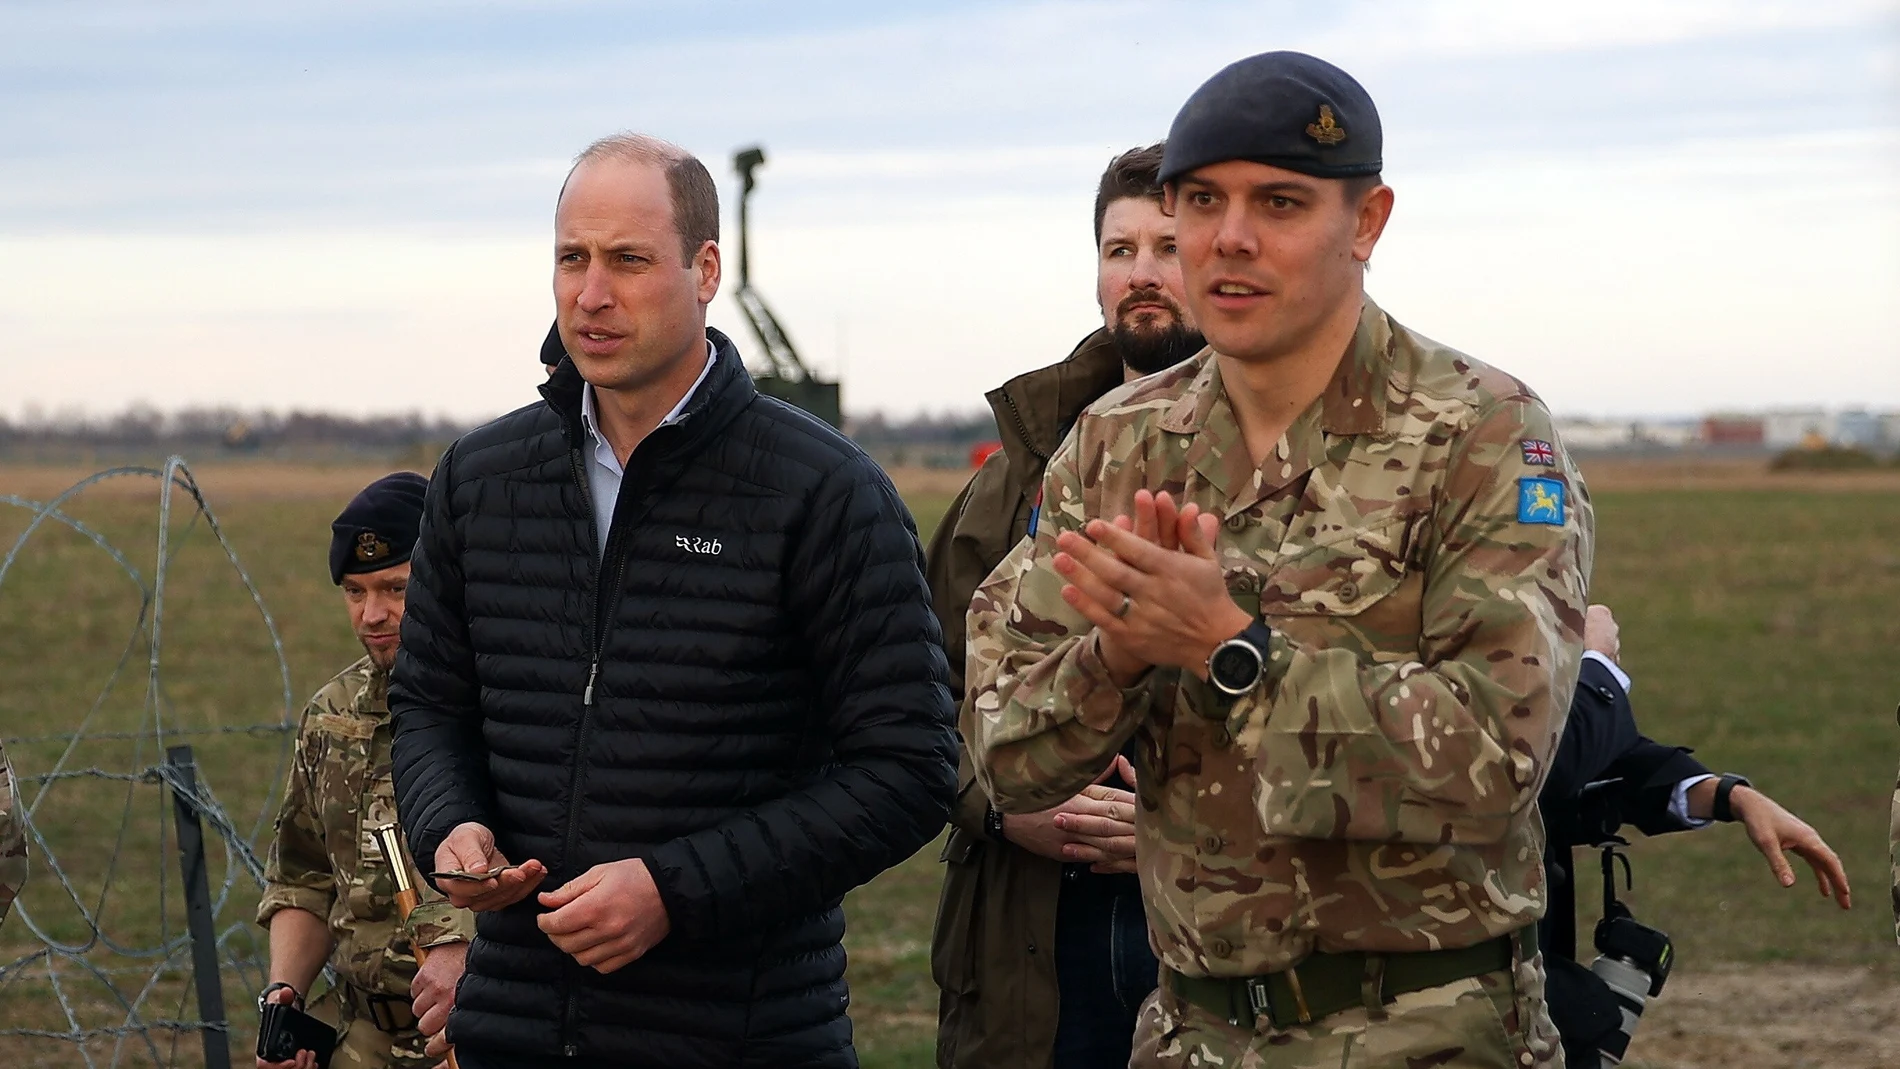  Britain's Prince William (L) meets with soldiers during a visit of the British military base in Jasionka, southeast Poland, 22 March 2023. The Prince of Wales arrived for a two-day visit to meet British and Polish troops based near the border with Ukraine. 